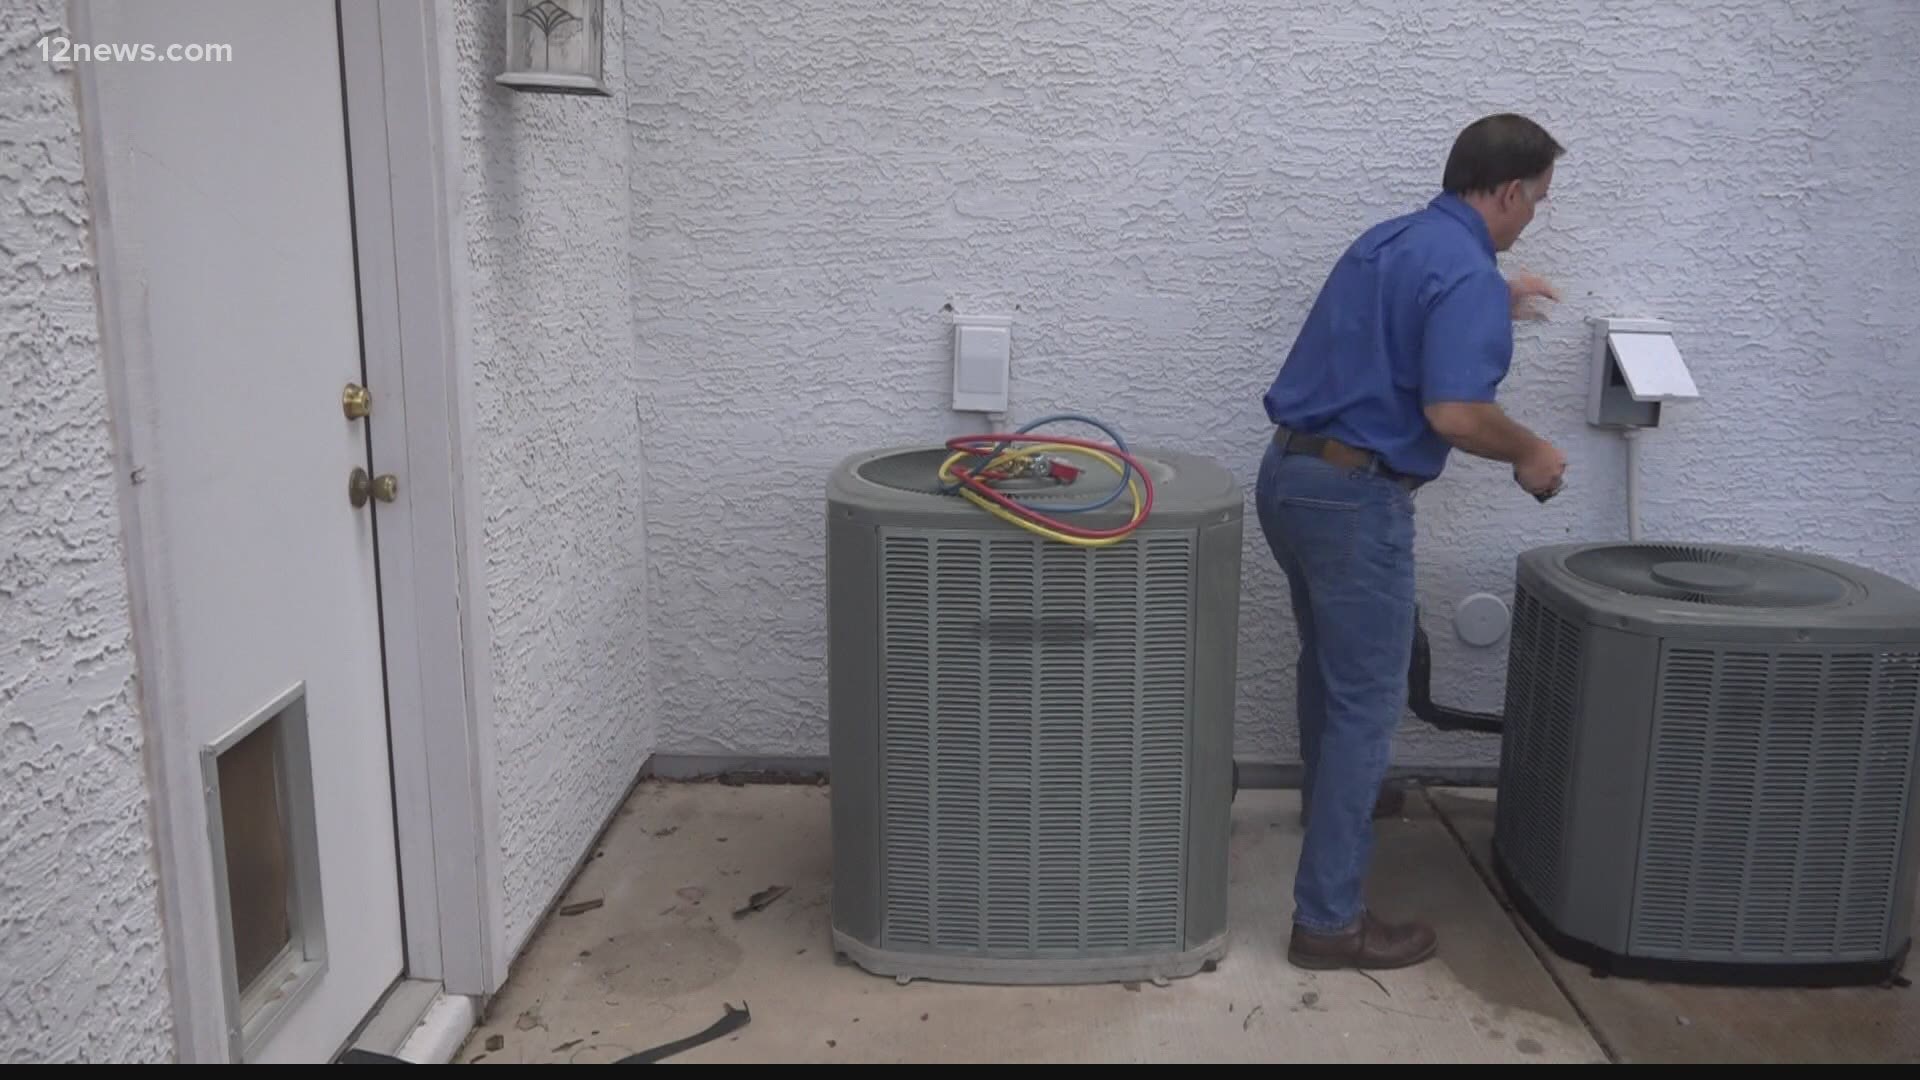 Experts say this year it's more important than ever to keep up the maintenance for your air conditioner. A material shortage is making maintenance more challenging.